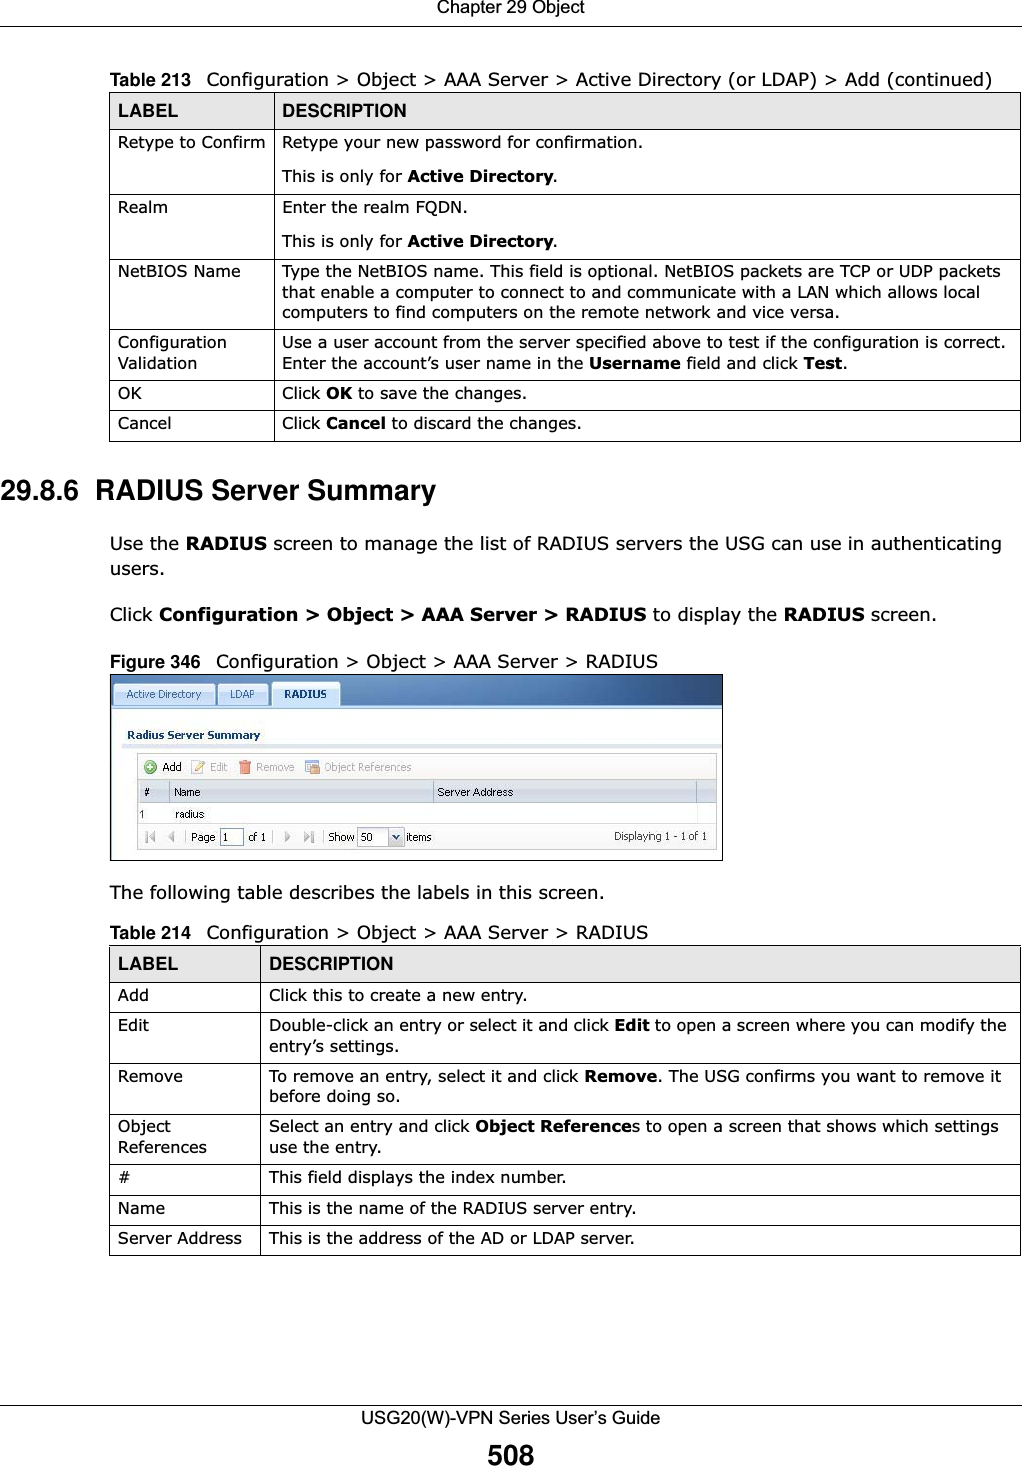 Chapter 29 ObjectUSG20(W)-VPN Series User’s Guide50829.8.6  RADIUS Server SummaryUse the RADIUS screen to manage the list of RADIUS servers the USG can use in authenticating users. Click Configuration &gt; Object &gt; AAA Server &gt; RADIUS to display the RADIUS screen. Figure 346   Configuration &gt; Object &gt; AAA Server &gt; RADIUS   The following table describes the labels in this screen.  Retype to Confirm Retype your new password for confirmation.This is only for Active Directory.Realm Enter the realm FQDN.This is only for Active Directory.NetBIOS Name Type the NetBIOS name. This field is optional. NetBIOS packets are TCP or UDP packets that enable a computer to connect to and communicate with a LAN which allows local computers to find computers on the remote network and vice versa.Configuration ValidationUse a user account from the server specified above to test if the configuration is correct. Enter the account’s user name in the Username field and click Test.OK Click OK to save the changes. Cancel Click Cancel to discard the changes. Table 213   Configuration &gt; Object &gt; AAA Server &gt; Active Directory (or LDAP) &gt; Add (continued)LABEL DESCRIPTIONTable 214   Configuration &gt; Object &gt; AAA Server &gt; RADIUSLABEL DESCRIPTIONAdd Click this to create a new entry.Edit Double-click an entry or select it and click Edit to open a screen where you can modify the entry’s settings. Remove To remove an entry, select it and click Remove. The USG confirms you want to remove it before doing so.Object ReferencesSelect an entry and click Object References to open a screen that shows which settings use the entry.# This field displays the index number. Name This is the name of the RADIUS server entry.Server Address This is the address of the AD or LDAP server.